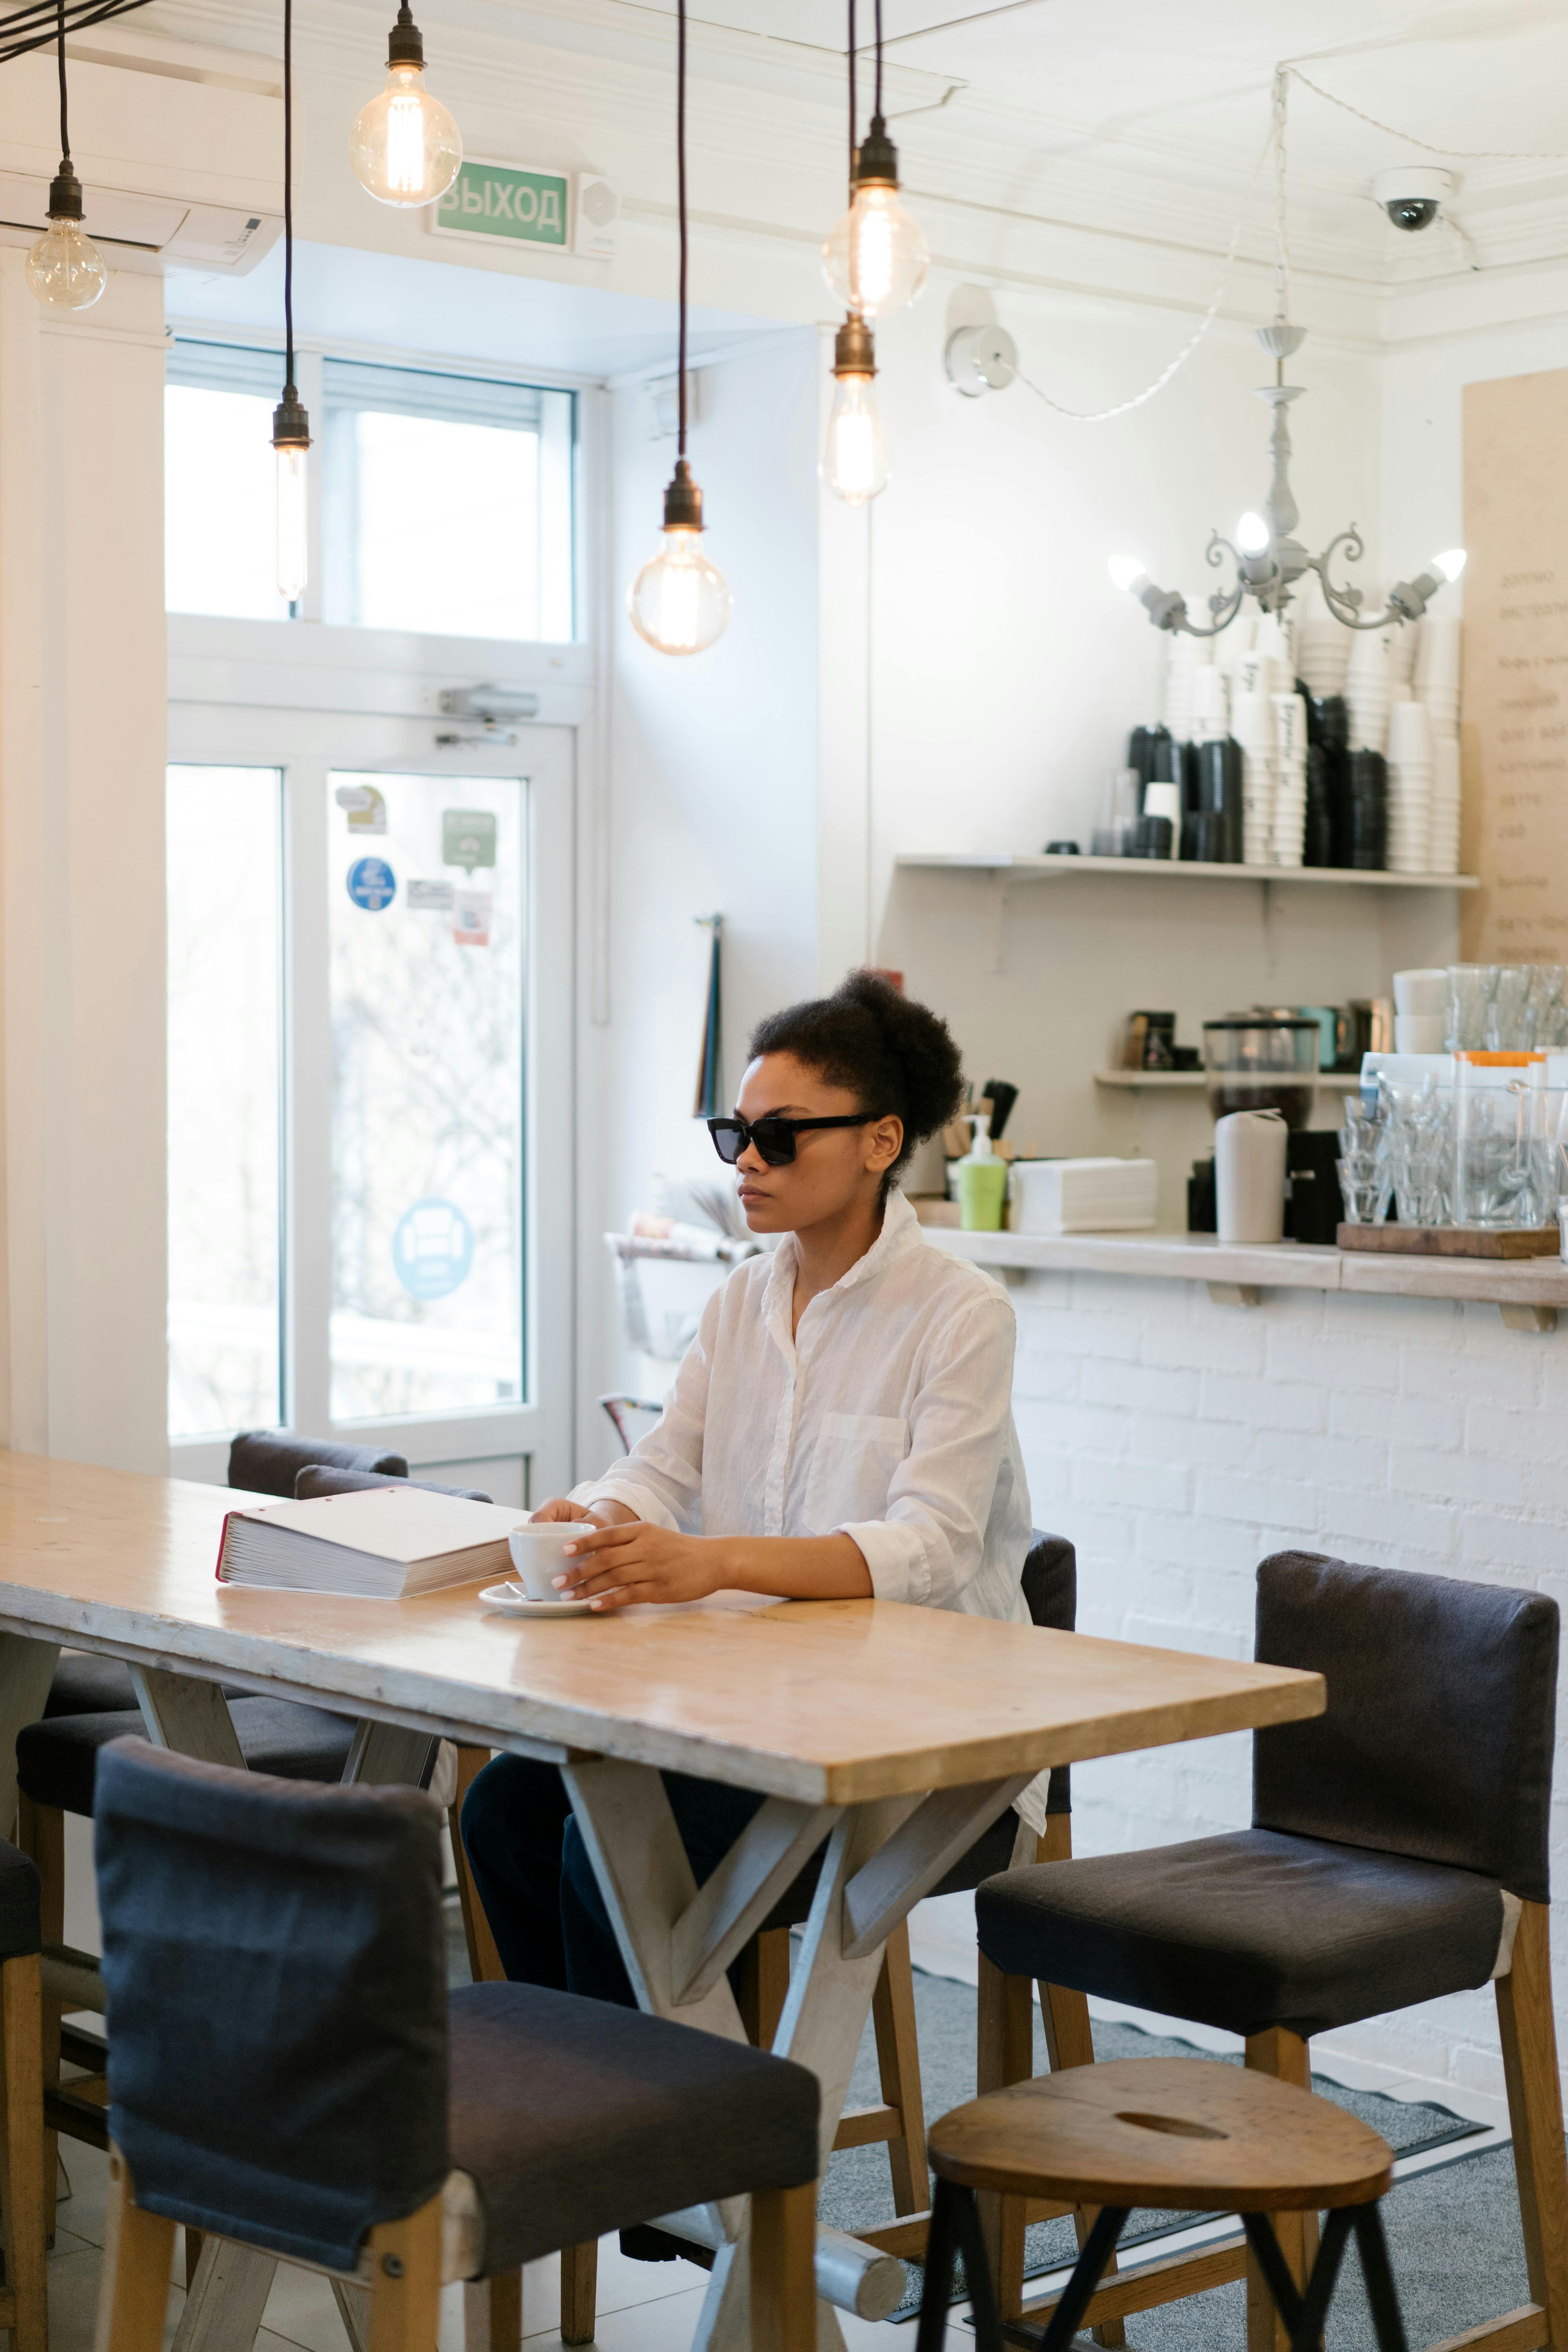 A woman wearing sunglasses sitting at a table in a café | Source: Pexels